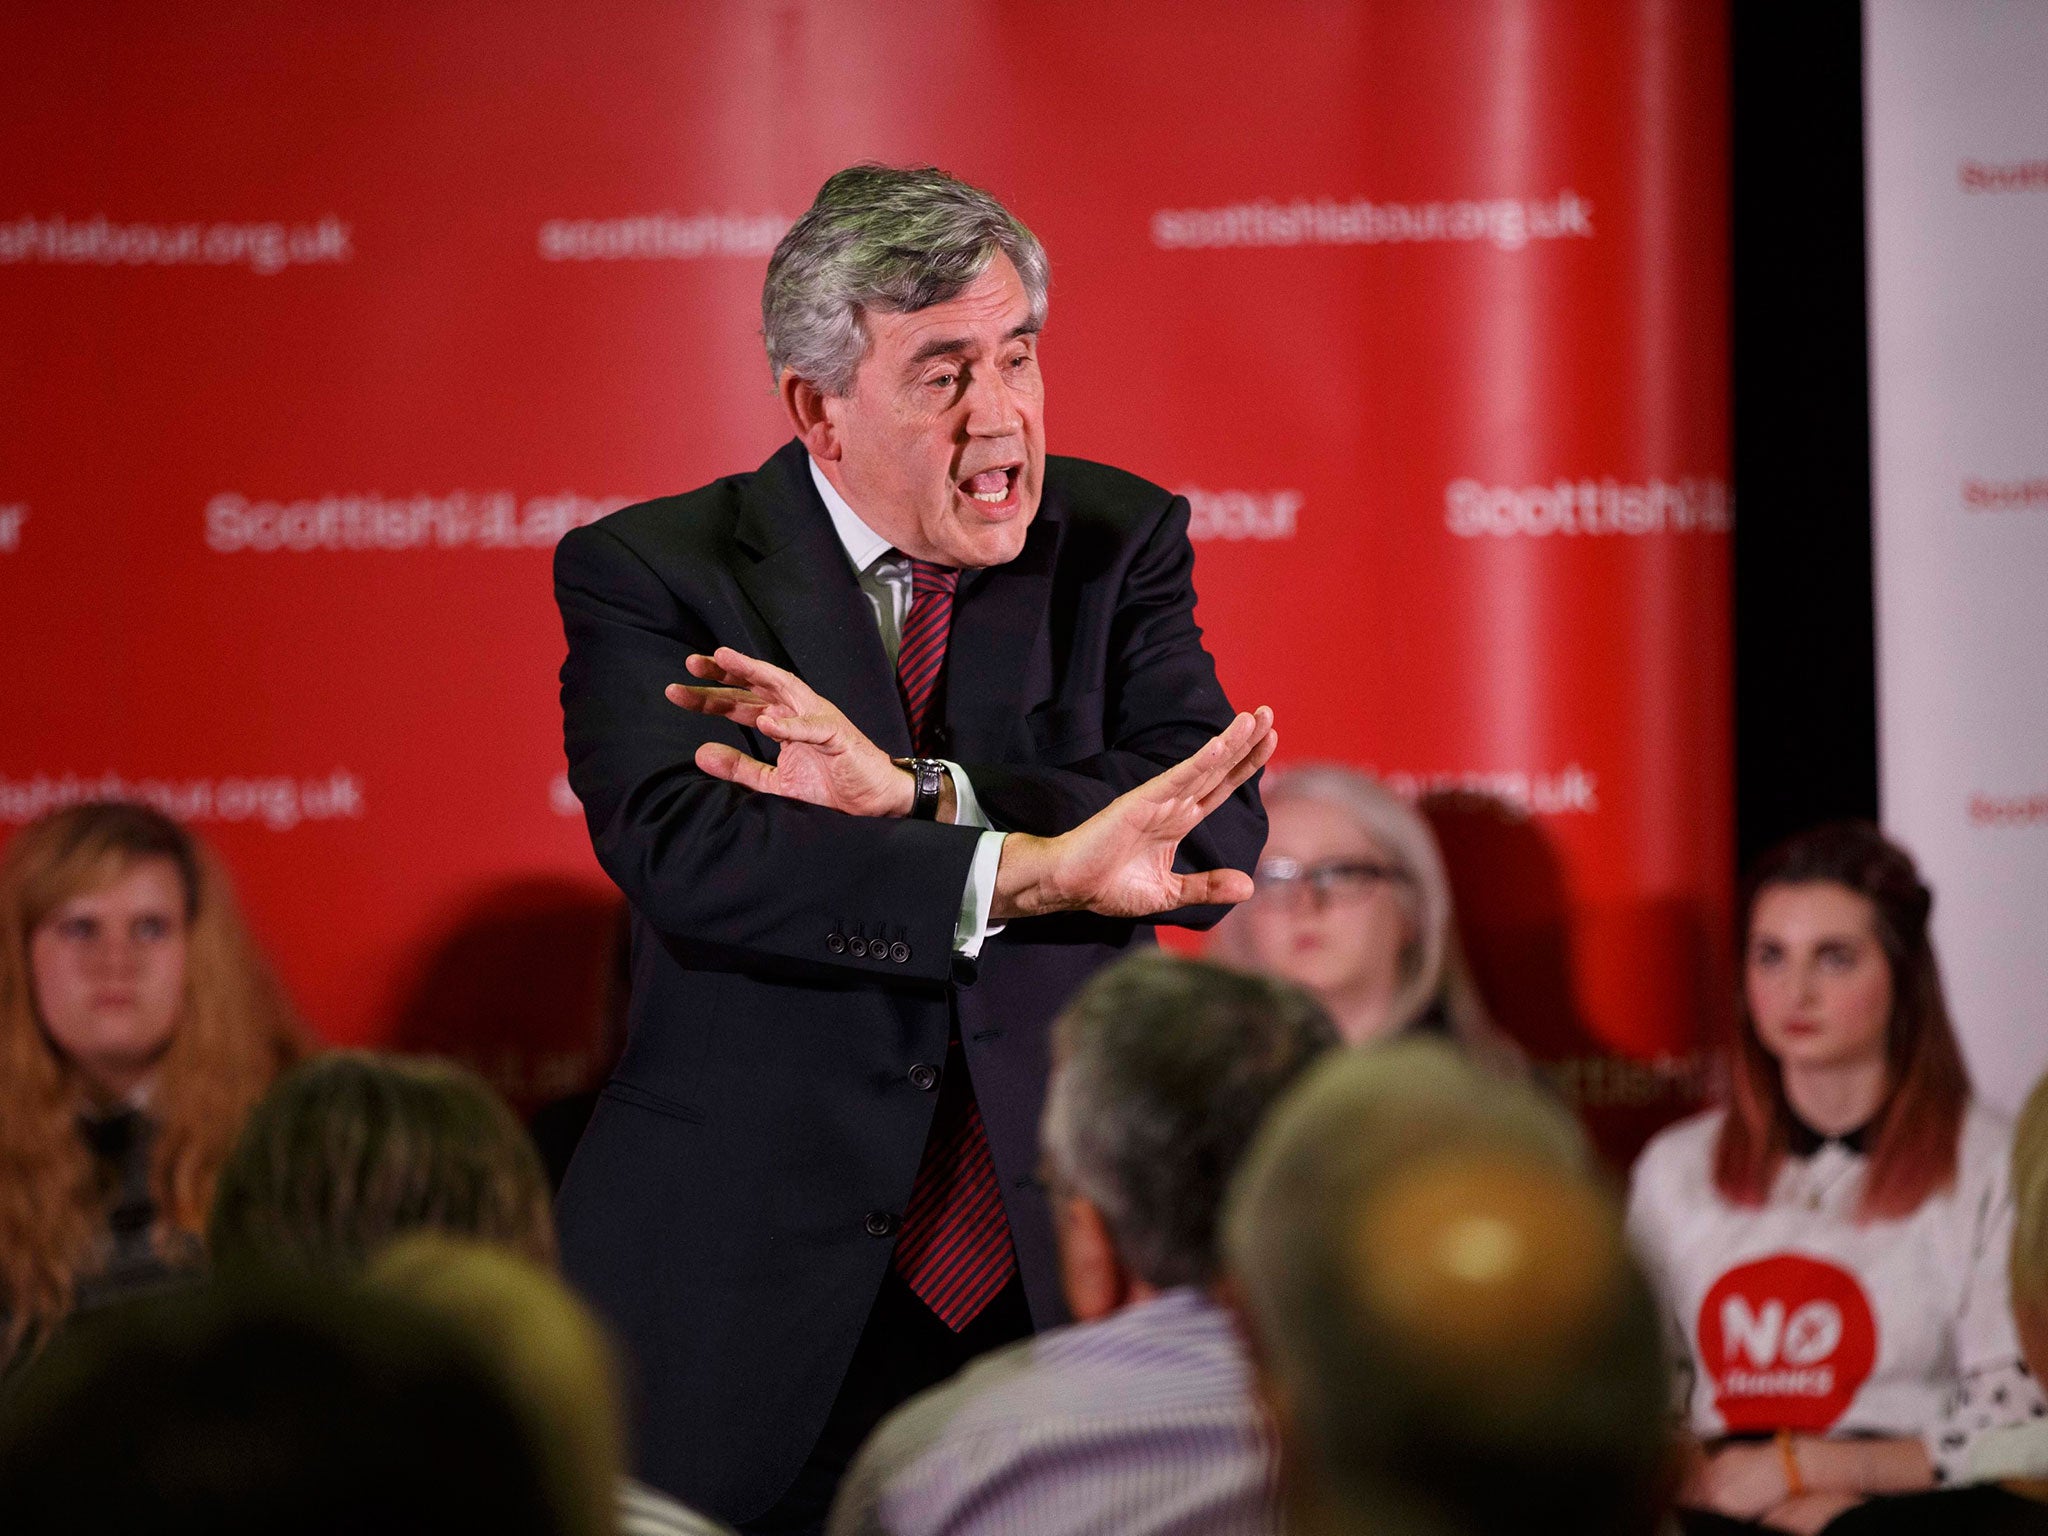 Gordon Brown made a dramatic intervention in the Scottish independence battle as he set out moves to rush through new powers to Holyrood if next week’s referendum rejects the break-up of the United Kingdom